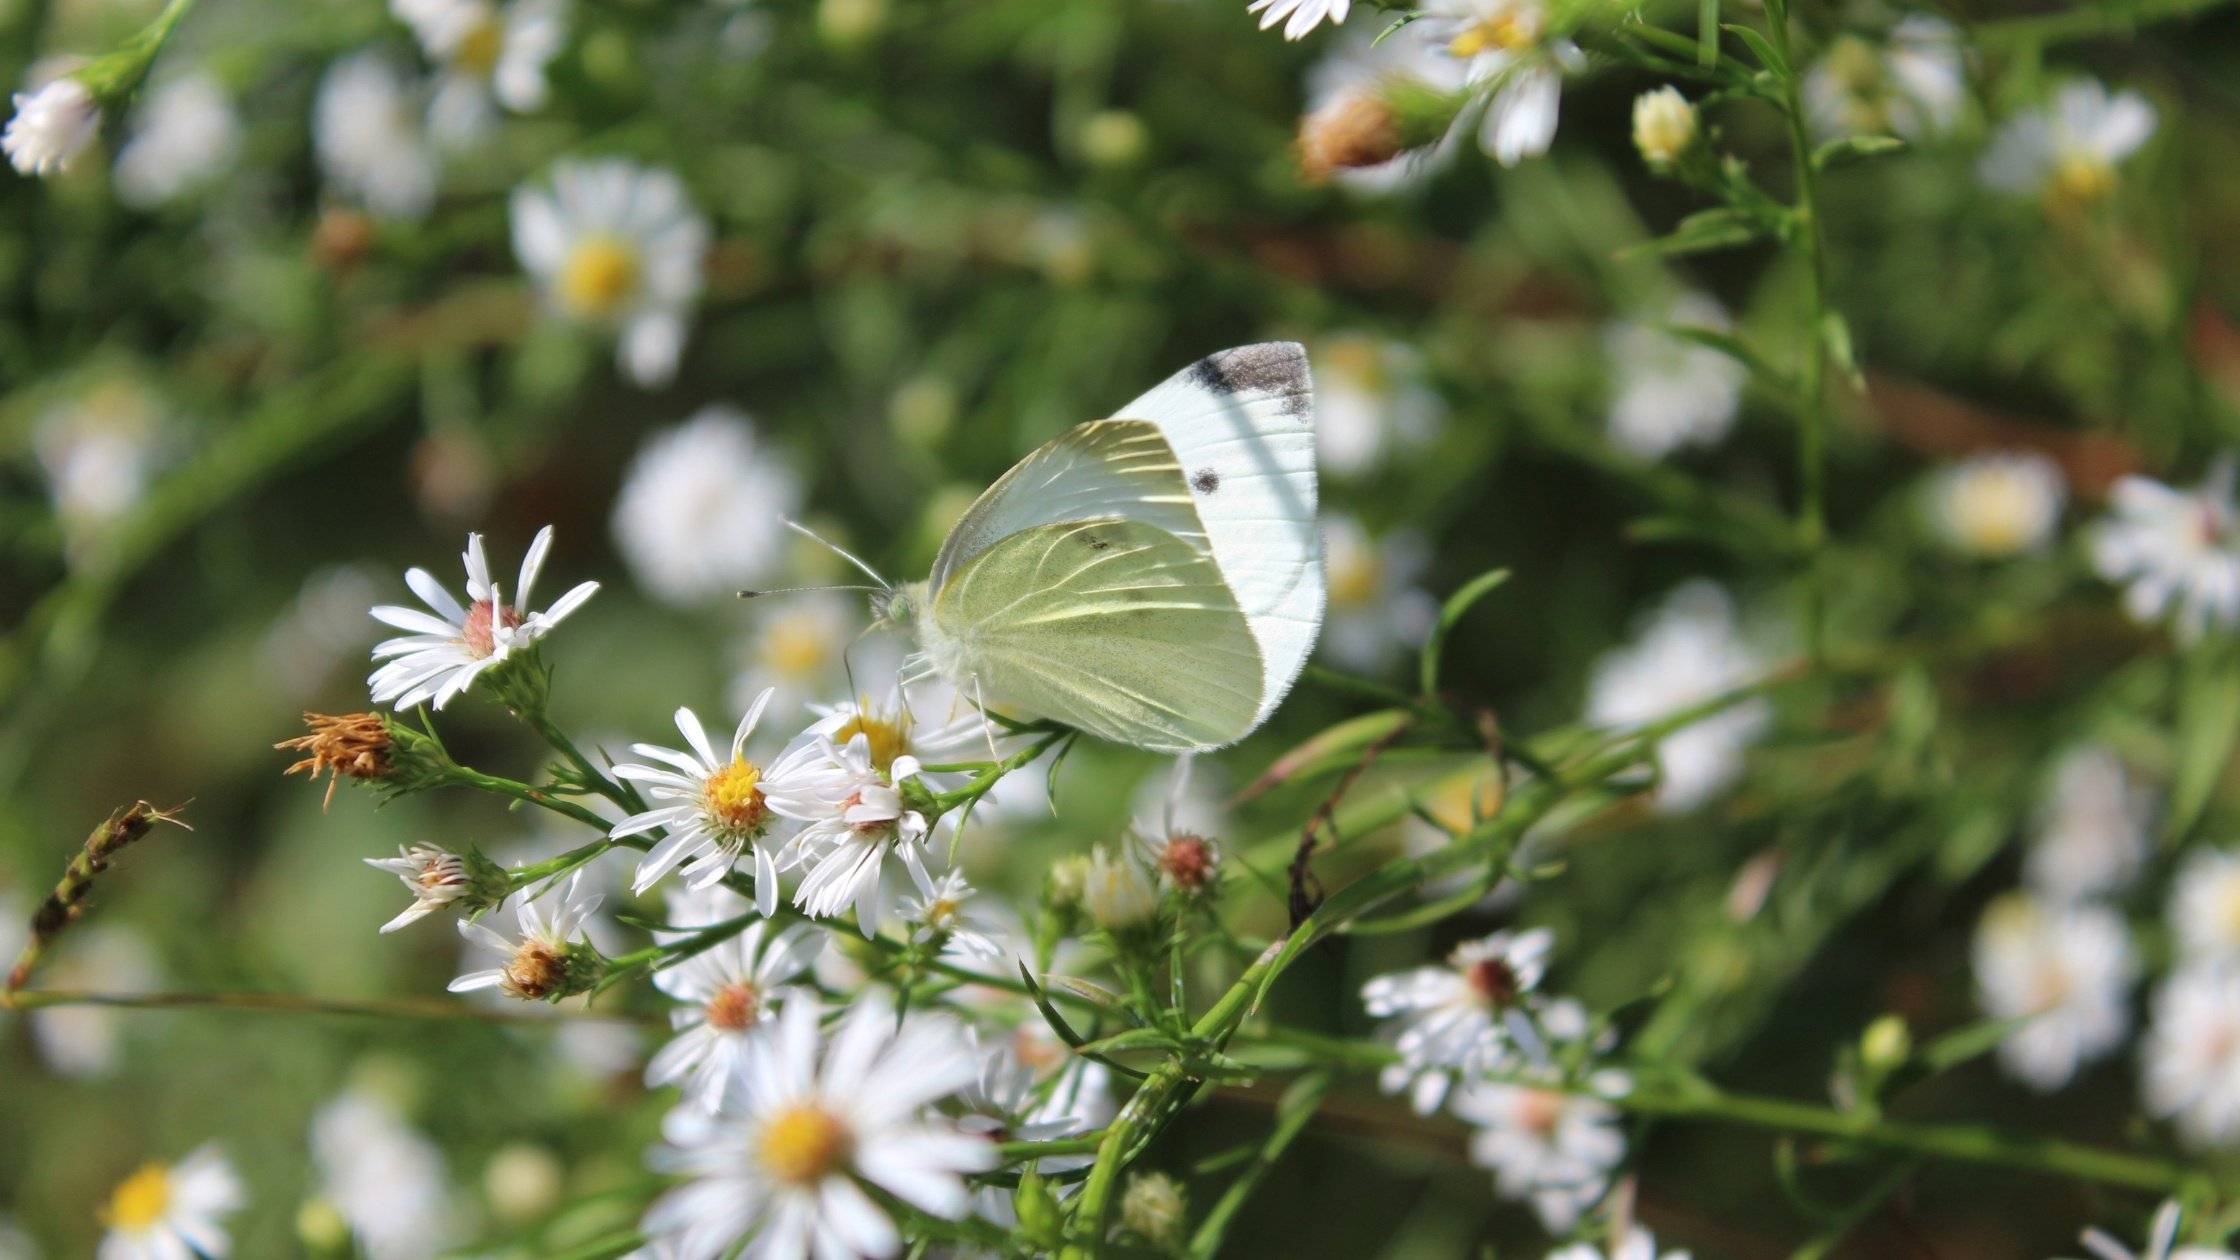 A butterfly feeds on an aster plant